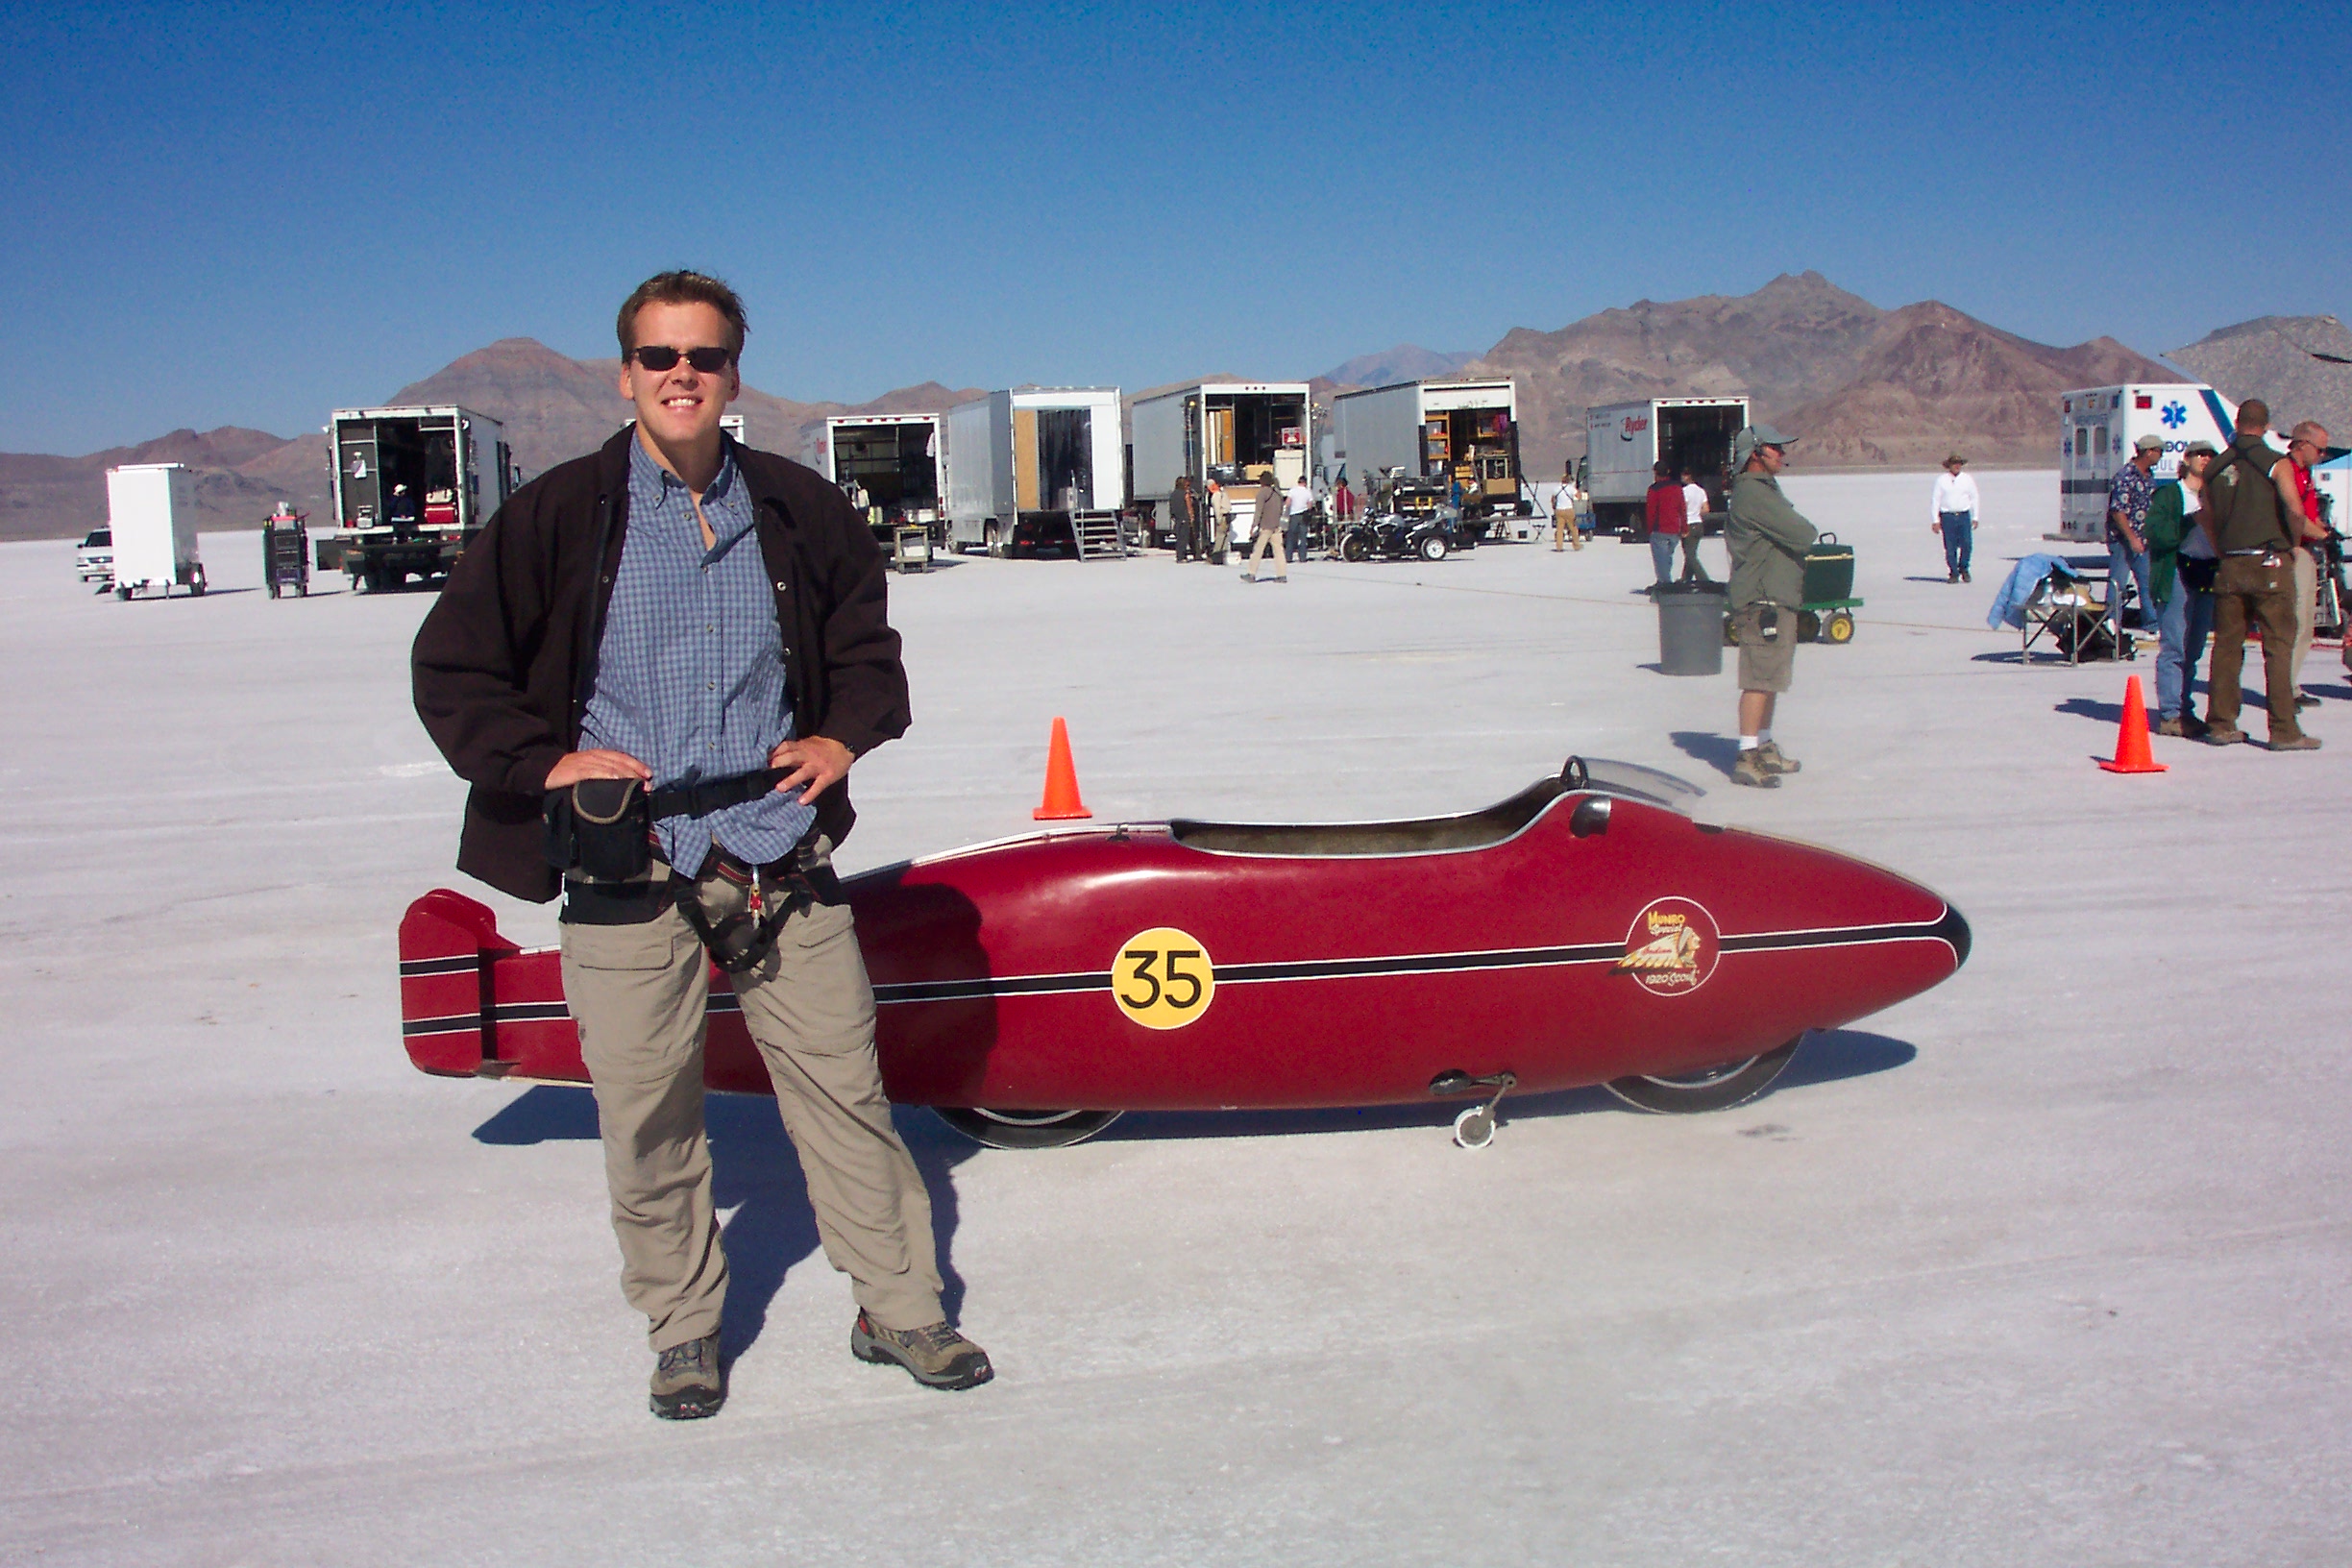 On the Salt Lakes for World's Fastest Indian. Our mockup went 70mph, the real one went 200+mph. Main Unit DP was David Gribble, ACS